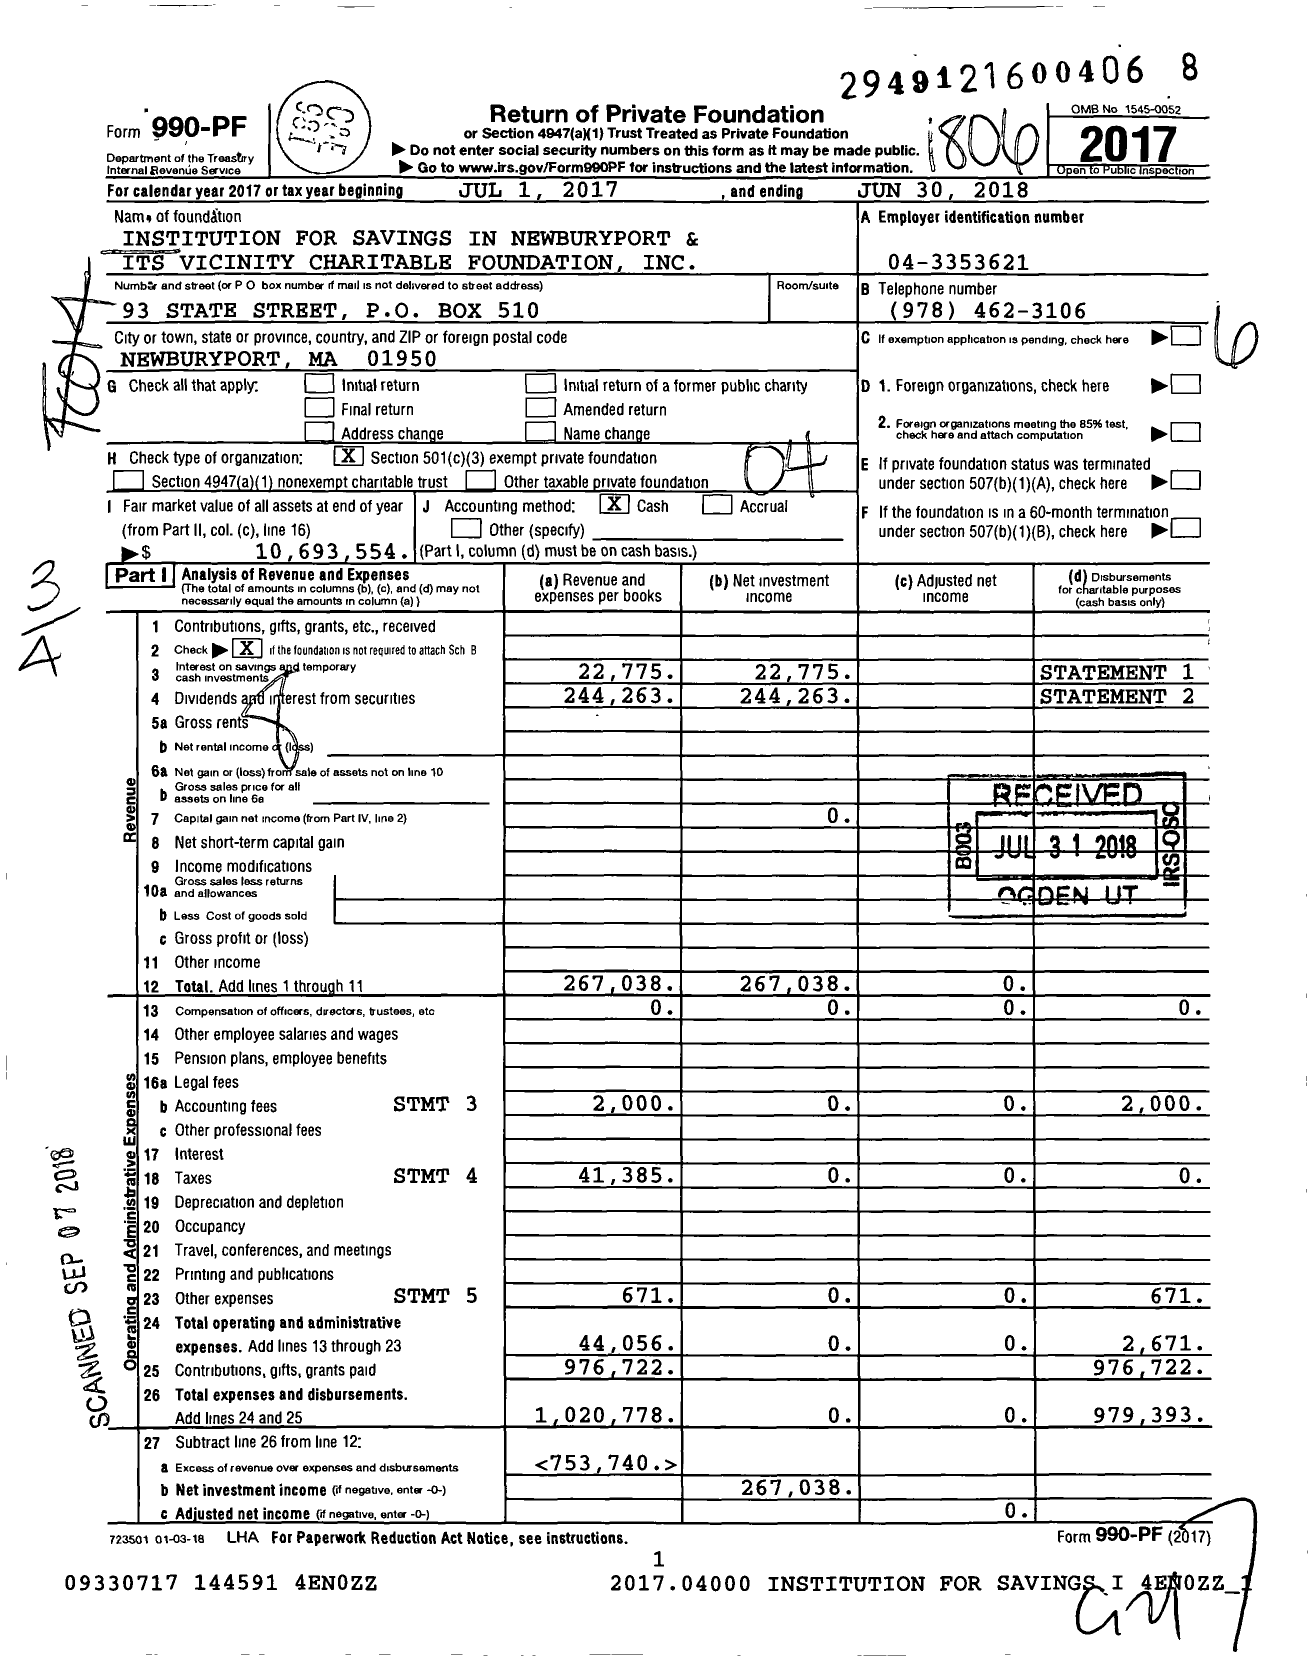 Image of first page of 2017 Form 990PF for Institution for Savings in Newburyport and Its Vicinity Charitable Foundation